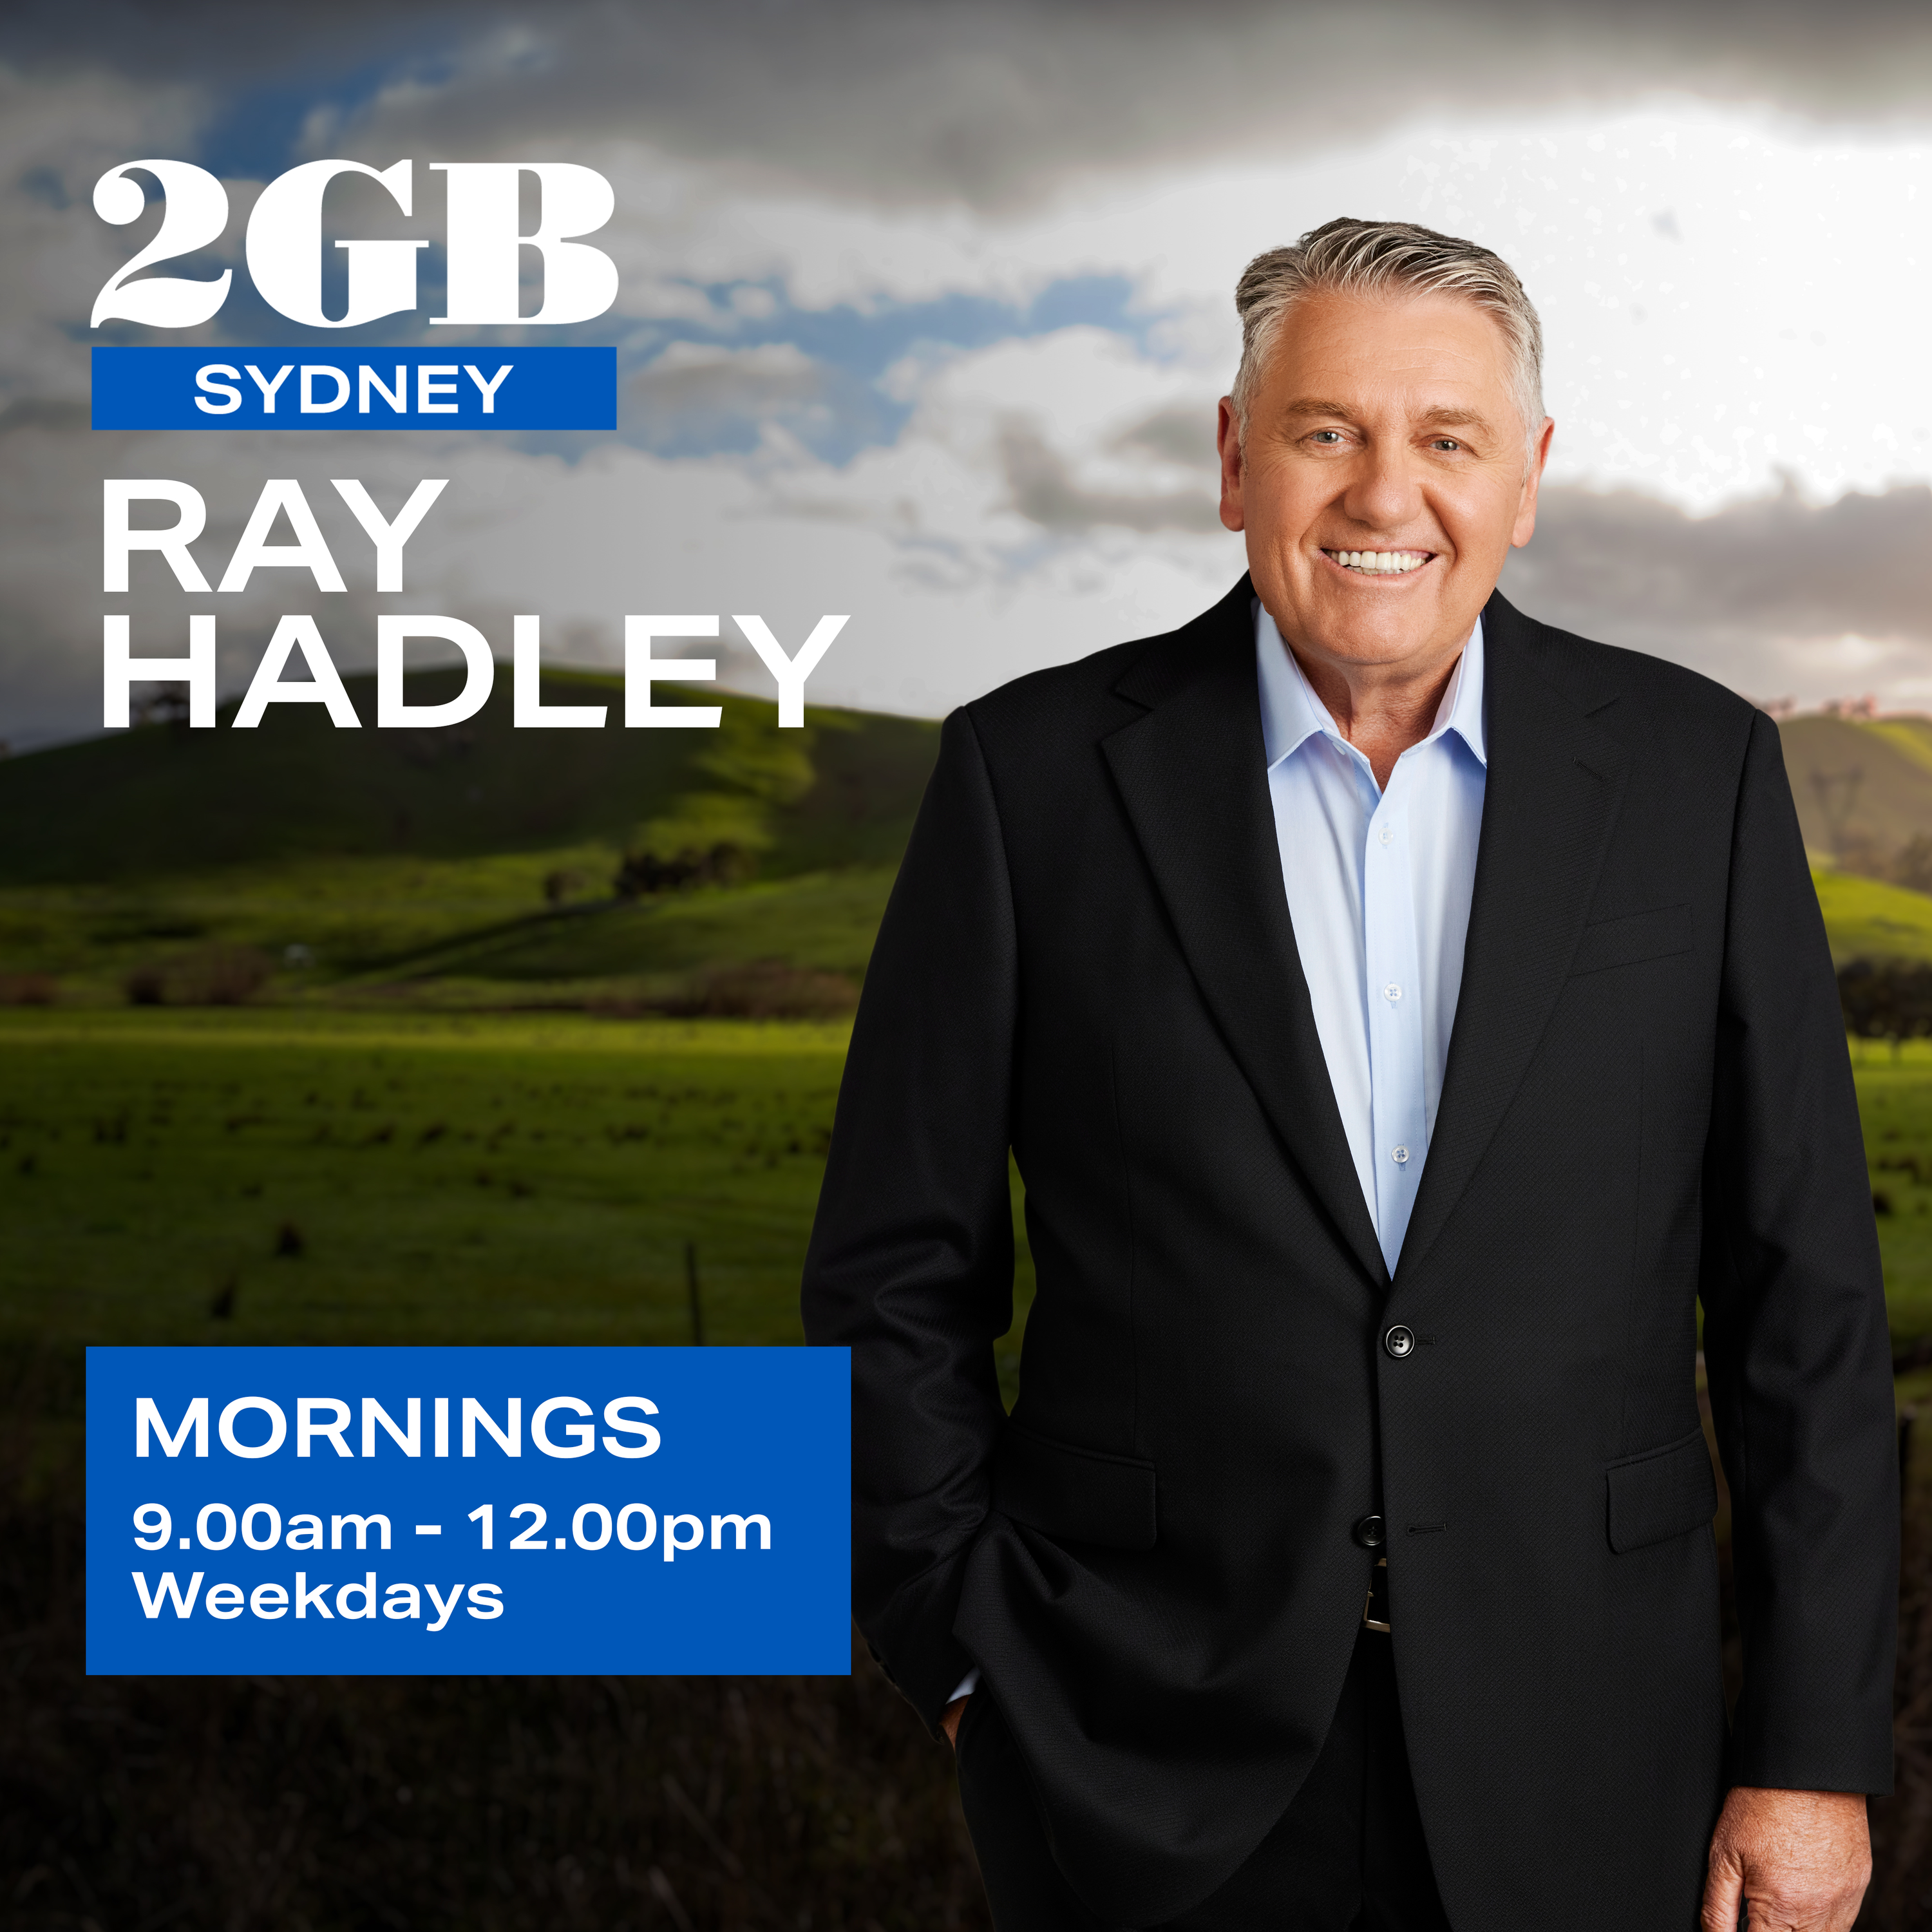 The Ray Hadley Morning Show - Highlights, September 21st